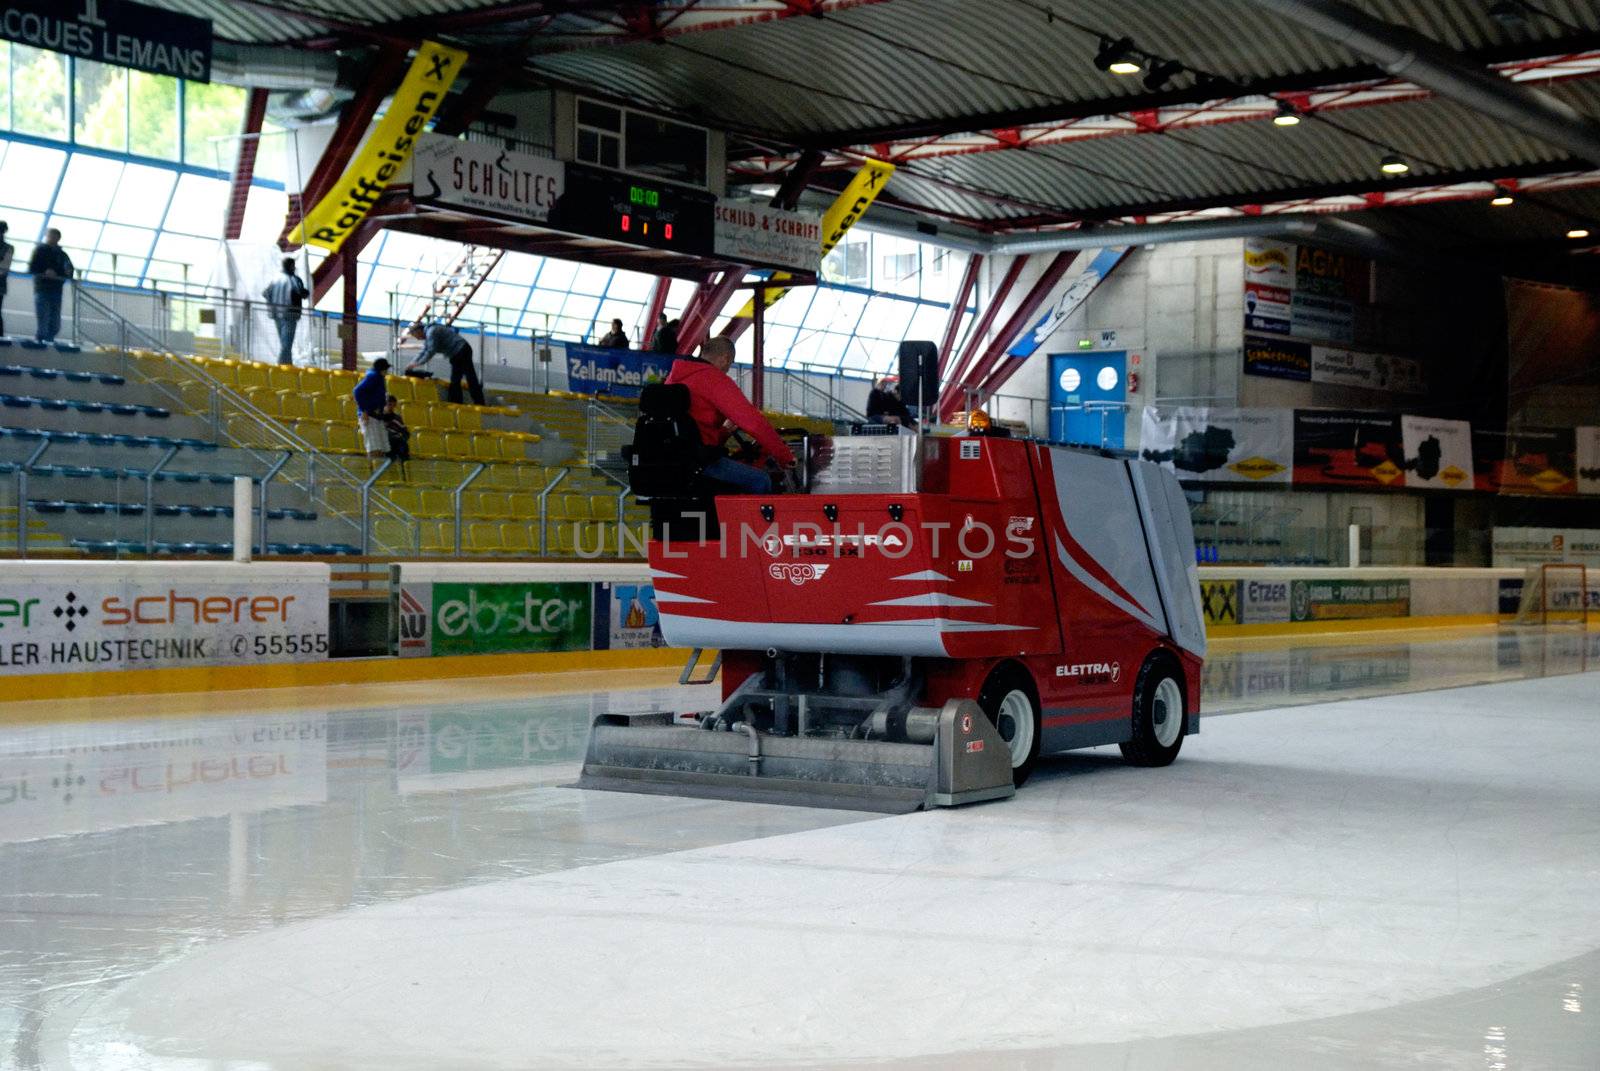 ZELL AM SEE, AUSTRIA - APRIL 30: Hockey world tournament. Bantam major final Black wings Linz (Austria) vs. Sokol-96 Kiev (Ukraine). Zamboni cleaning ice after the second period in the hockey rink of Zell am See, Austria in April 30, 2011.